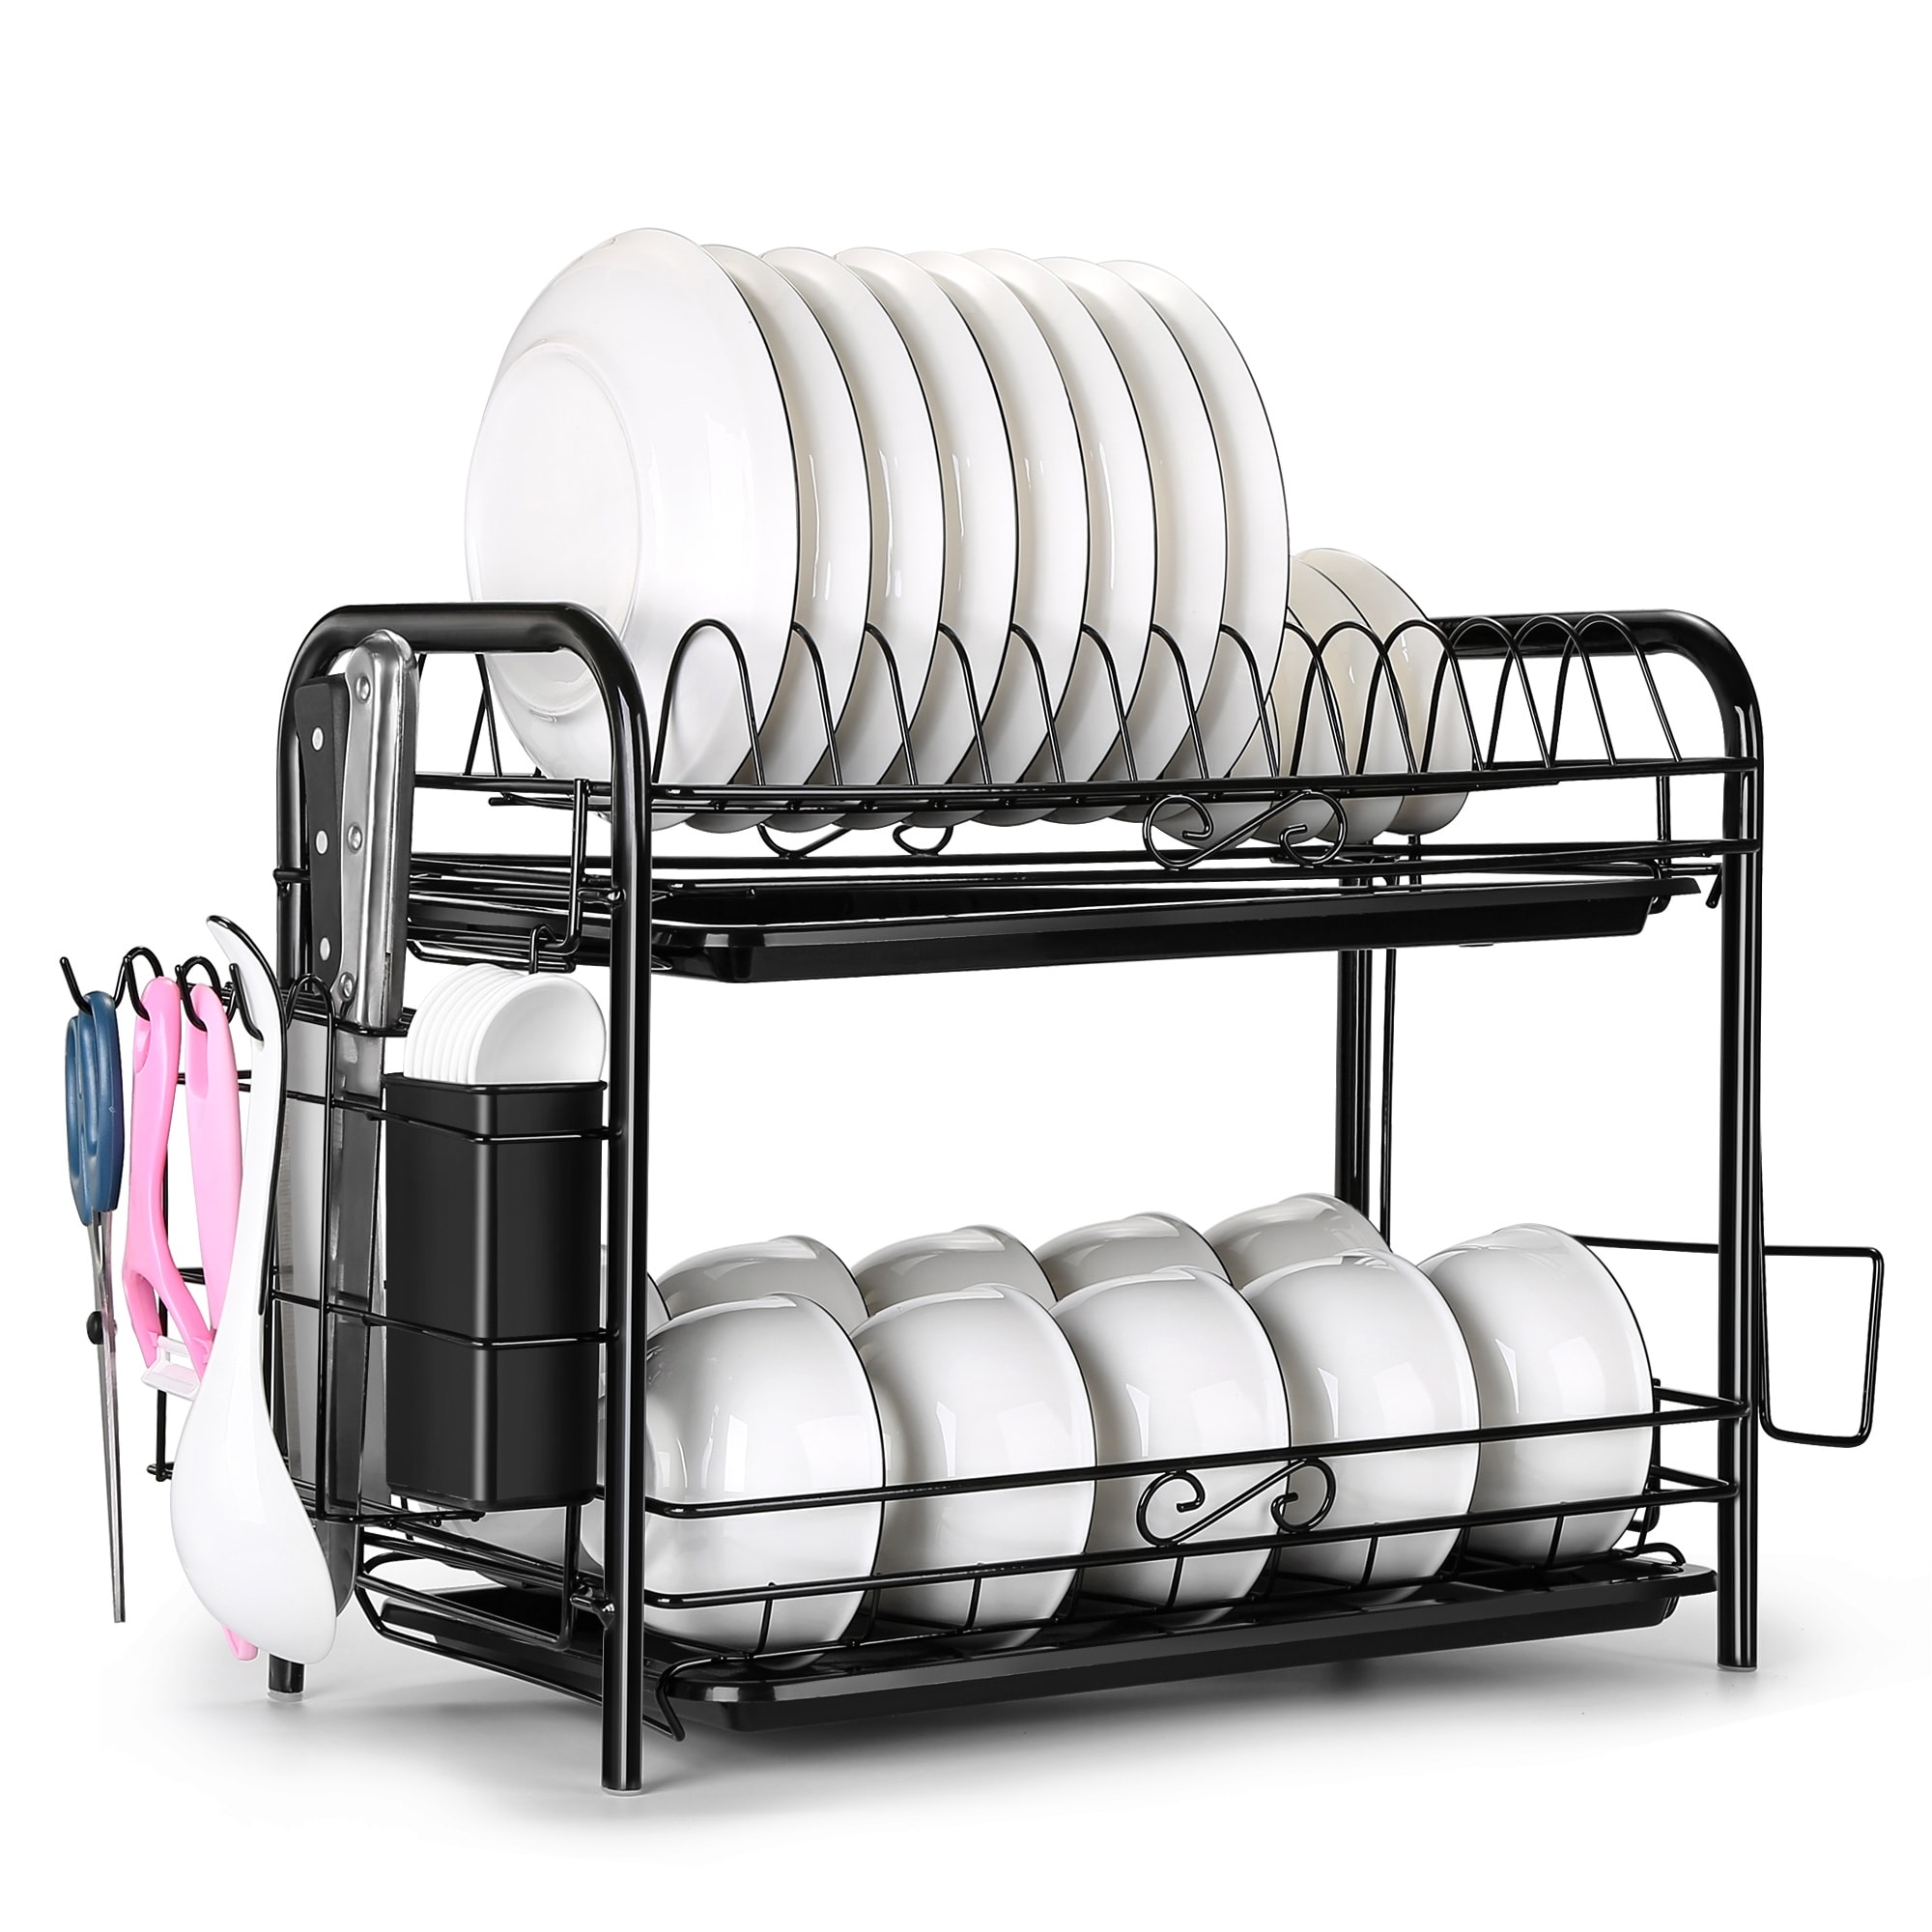 https://ak1.ostkcdn.com/images/products/is/images/direct/9a941a0169cf045e2bbb5d08f2abda26c9de6e7e/Large-Capacity-Dish-Drying-Rack-Over-The-Sink-Roll-Up-2-Tier-Kitchen-Storage.jpg